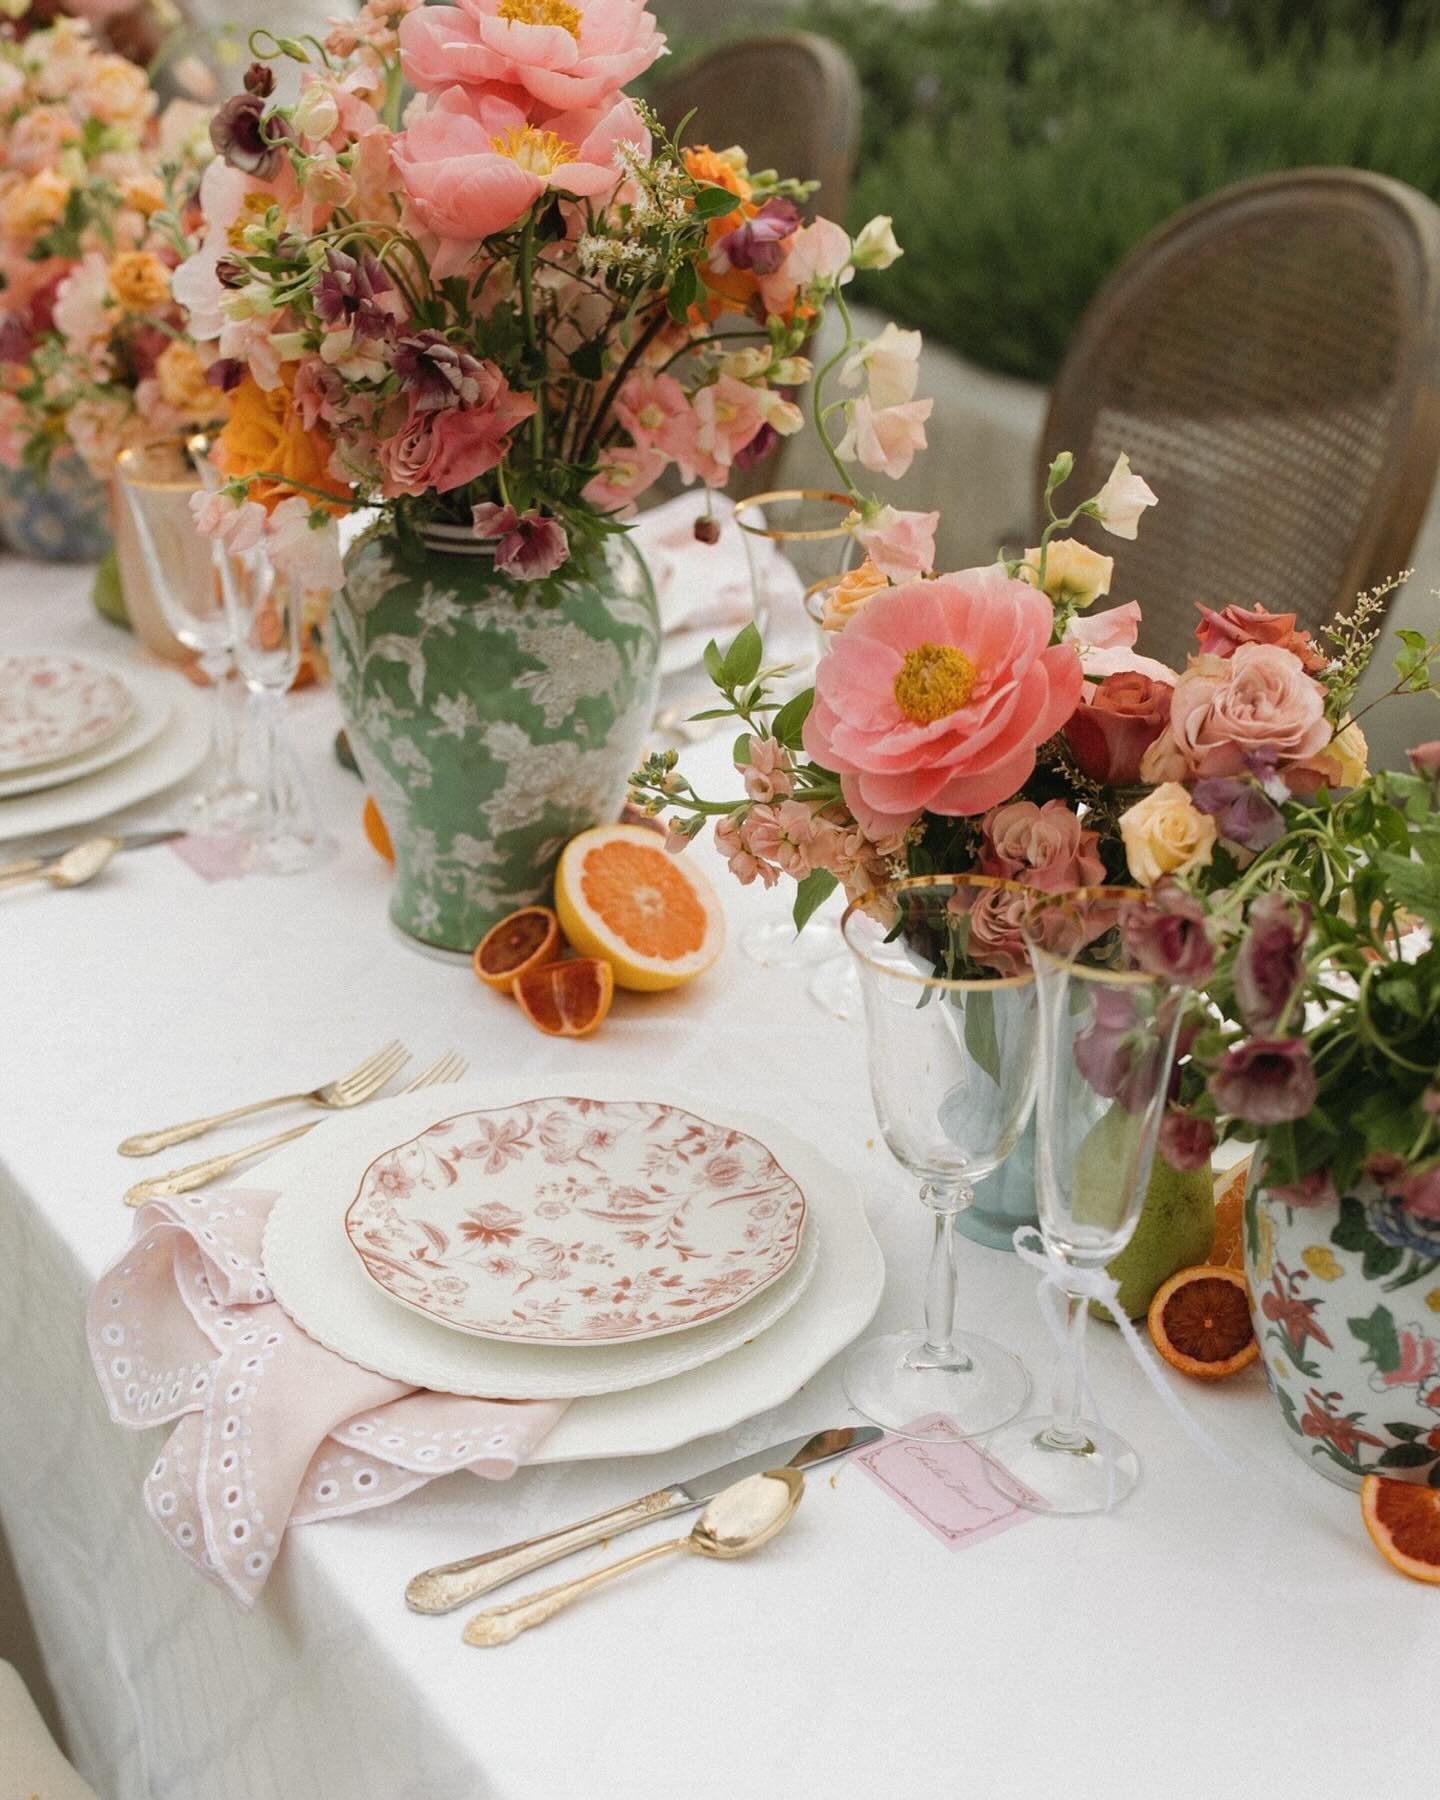 just a little taste of spring with these stunning details🌷✨🍊🫶🏼two of my fav things combined!!

- 

retreat: @rendezvousworkshops 
host: @tayloreneephotos 
planning: @fleakeventsco 
venue: @thebaumberhof 
florals: @crookedrootsdesign 
rentals: @ma